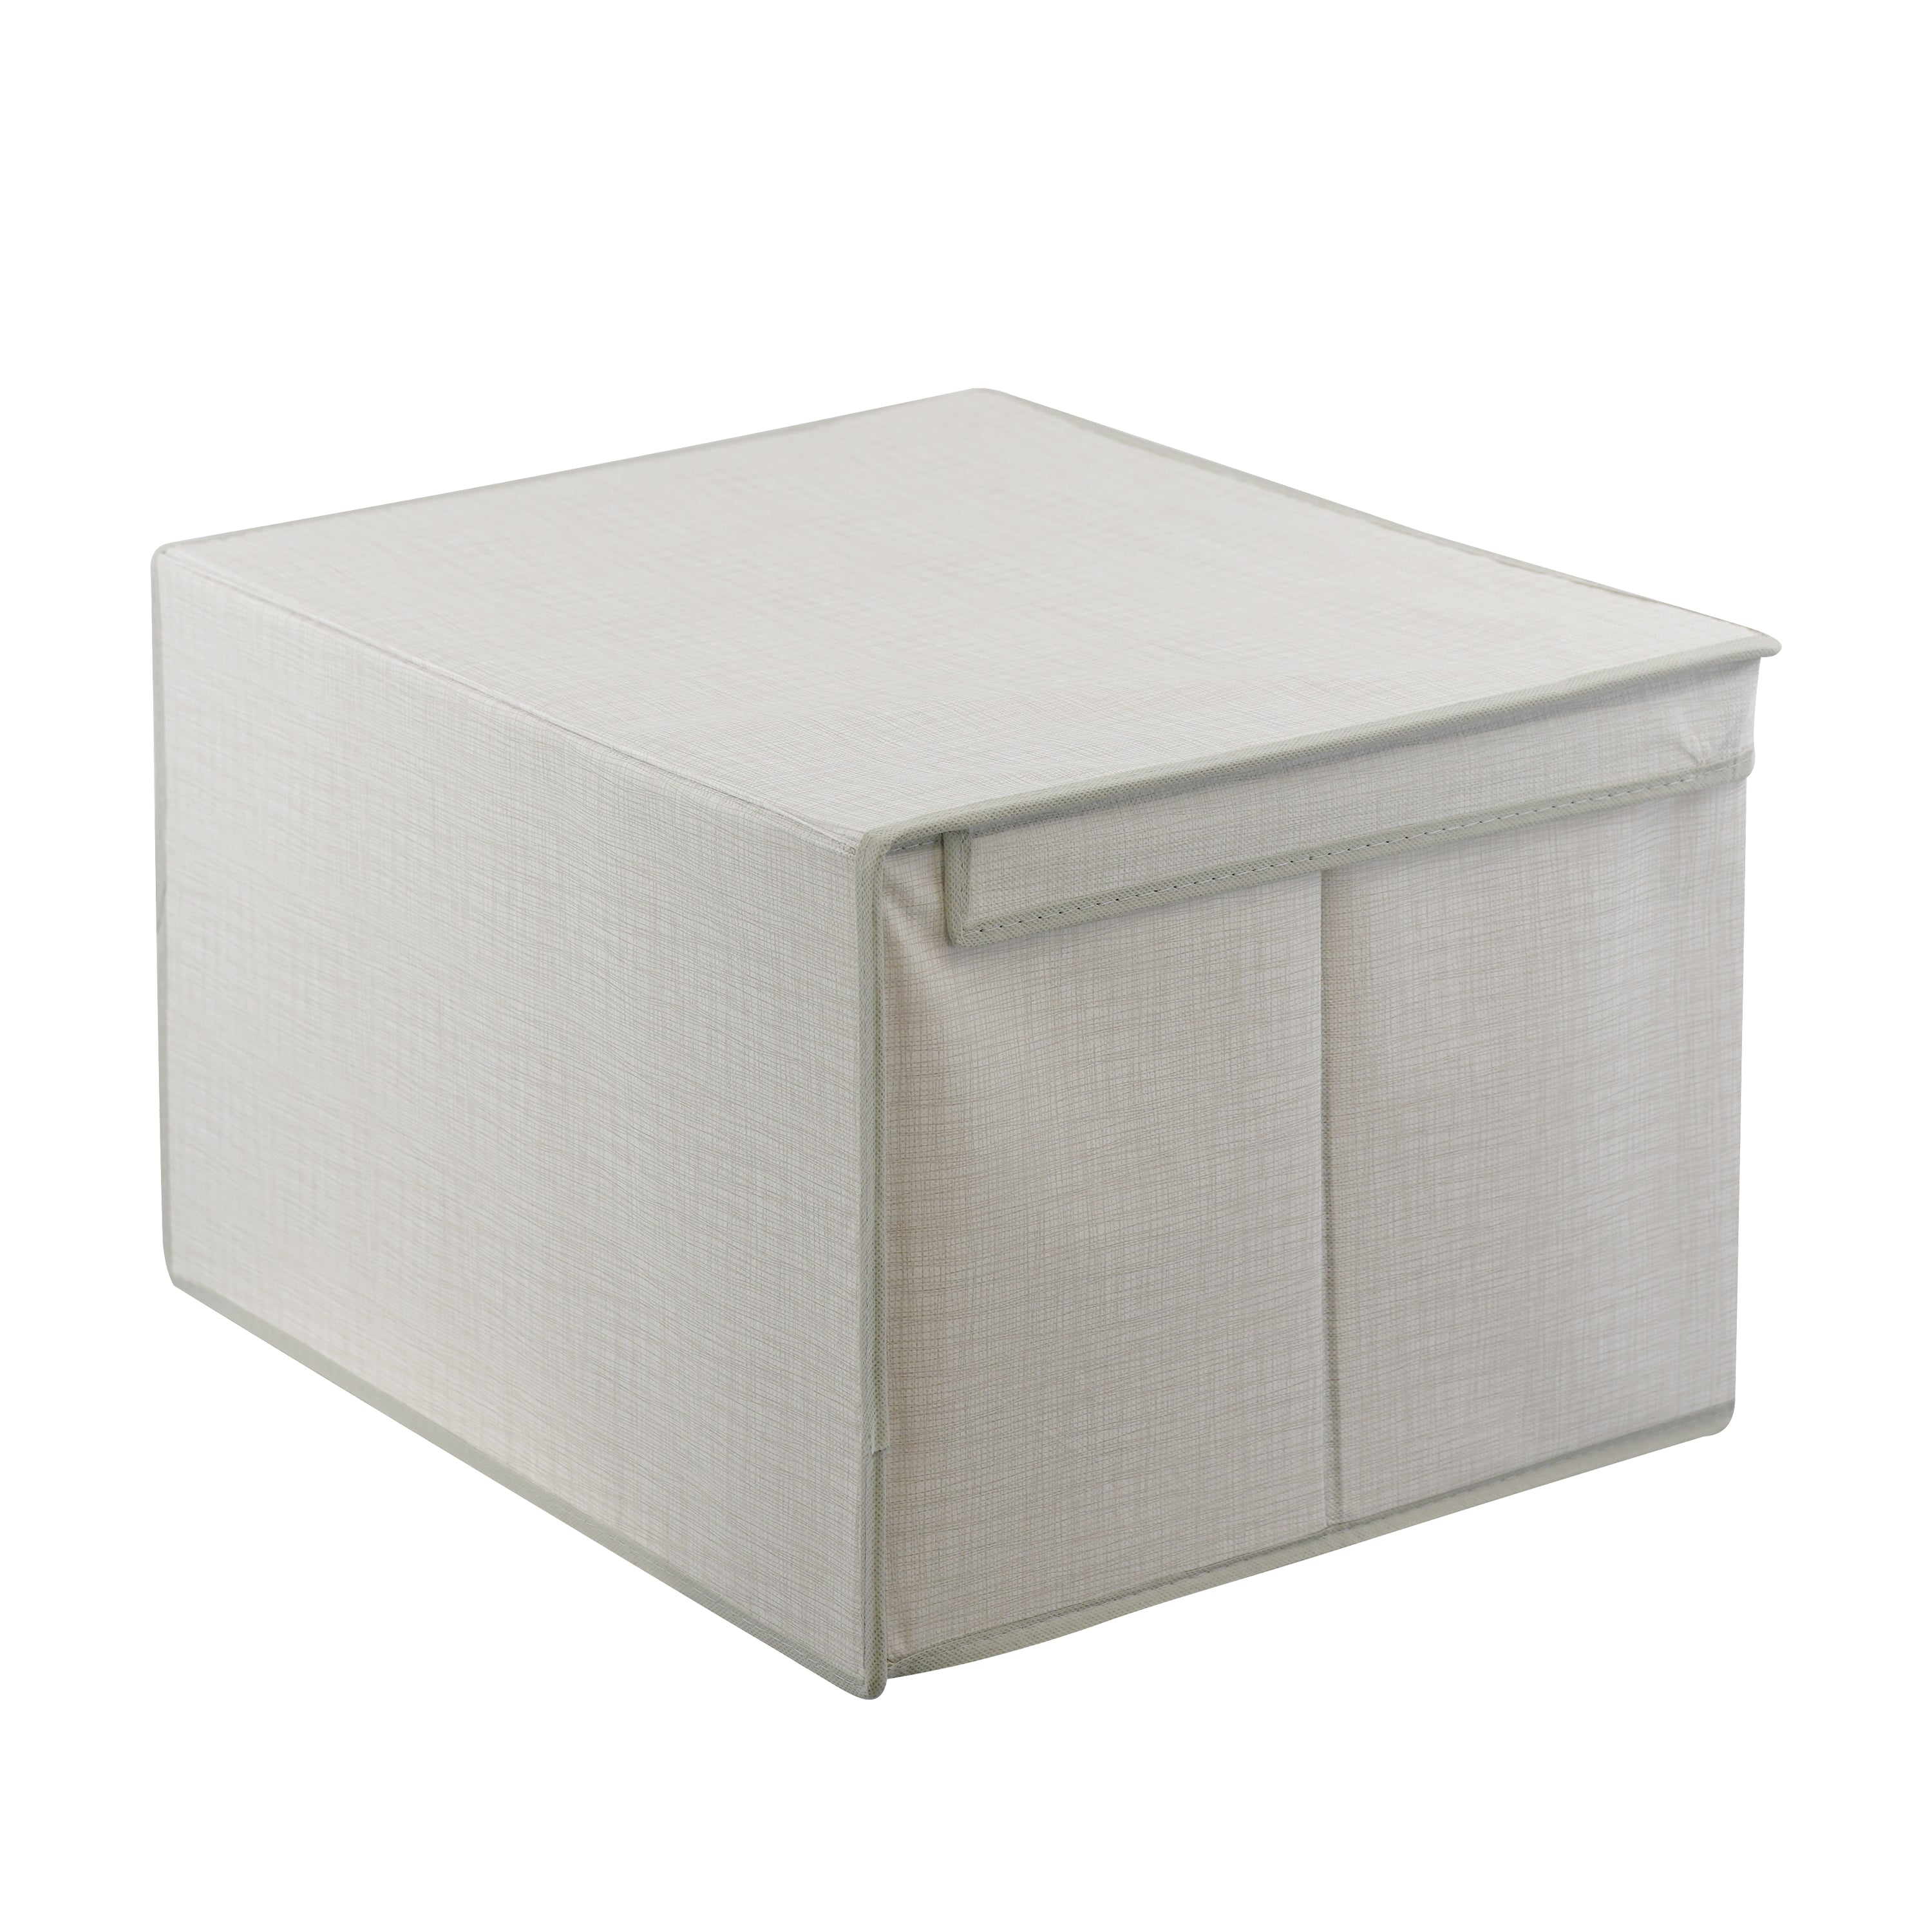 Linen Natural Large Storage Box GEEZY - The Magic Toy Shop